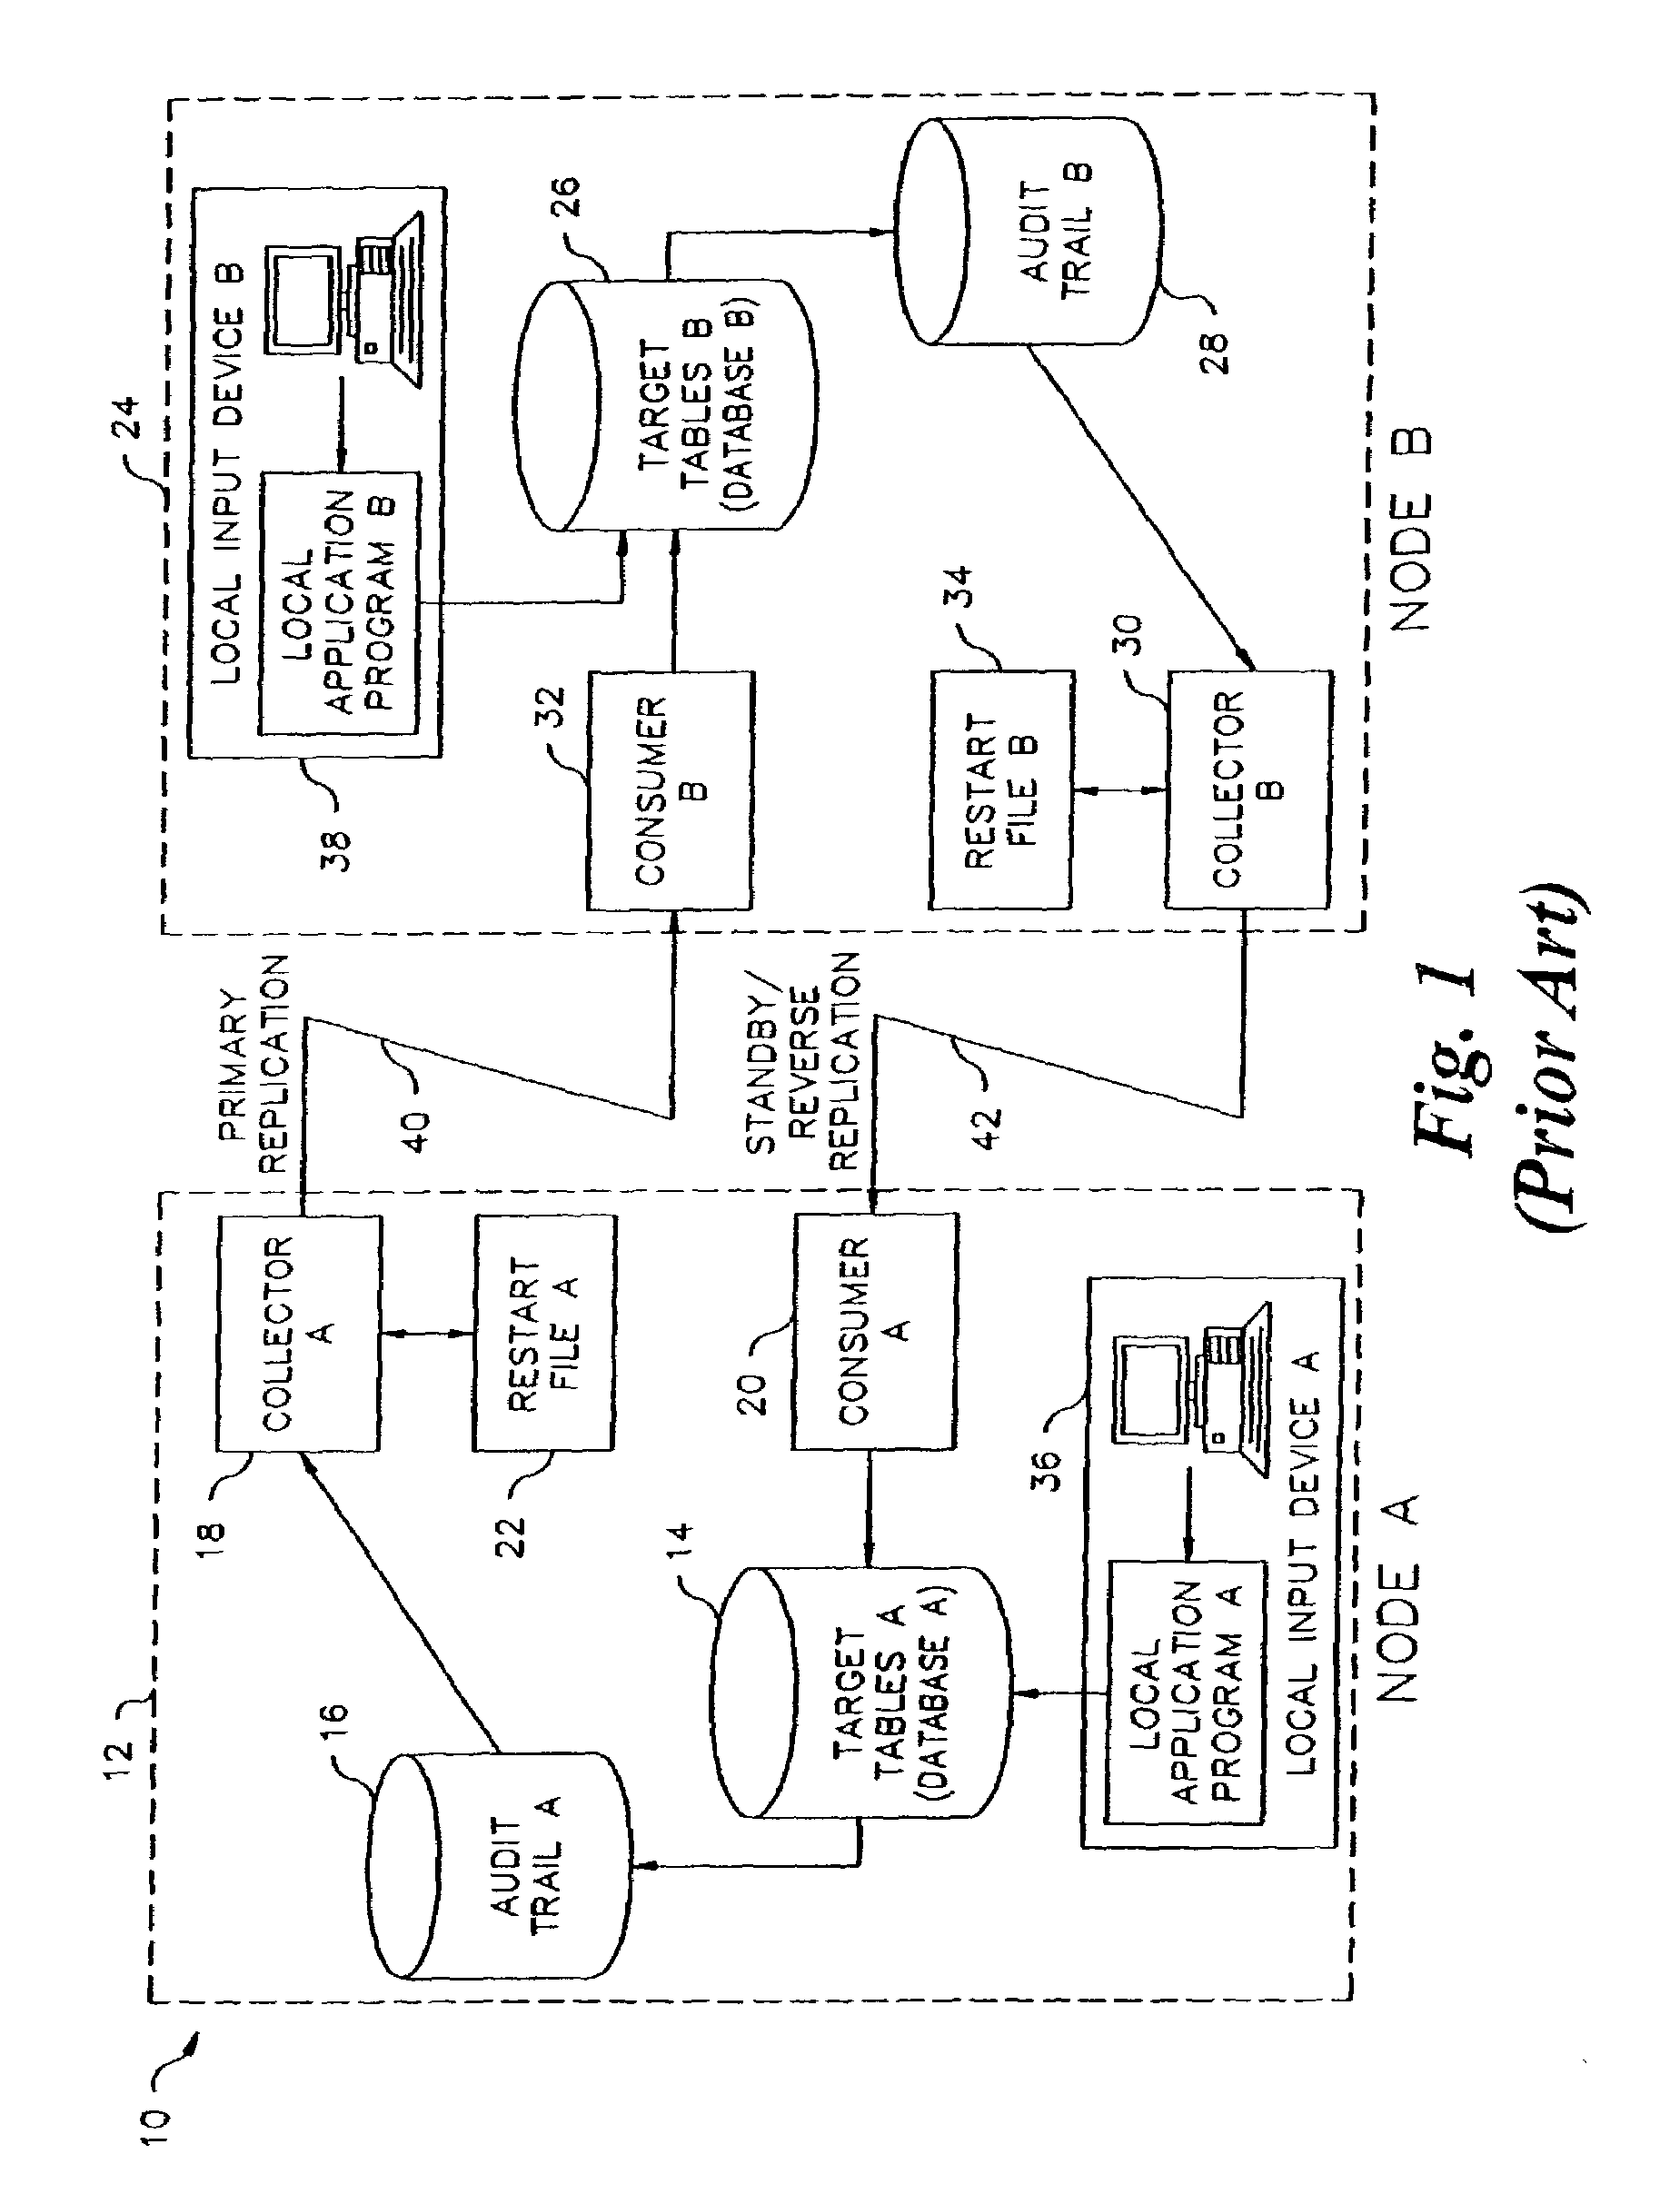 Synchronization of plural databases in a database replication system